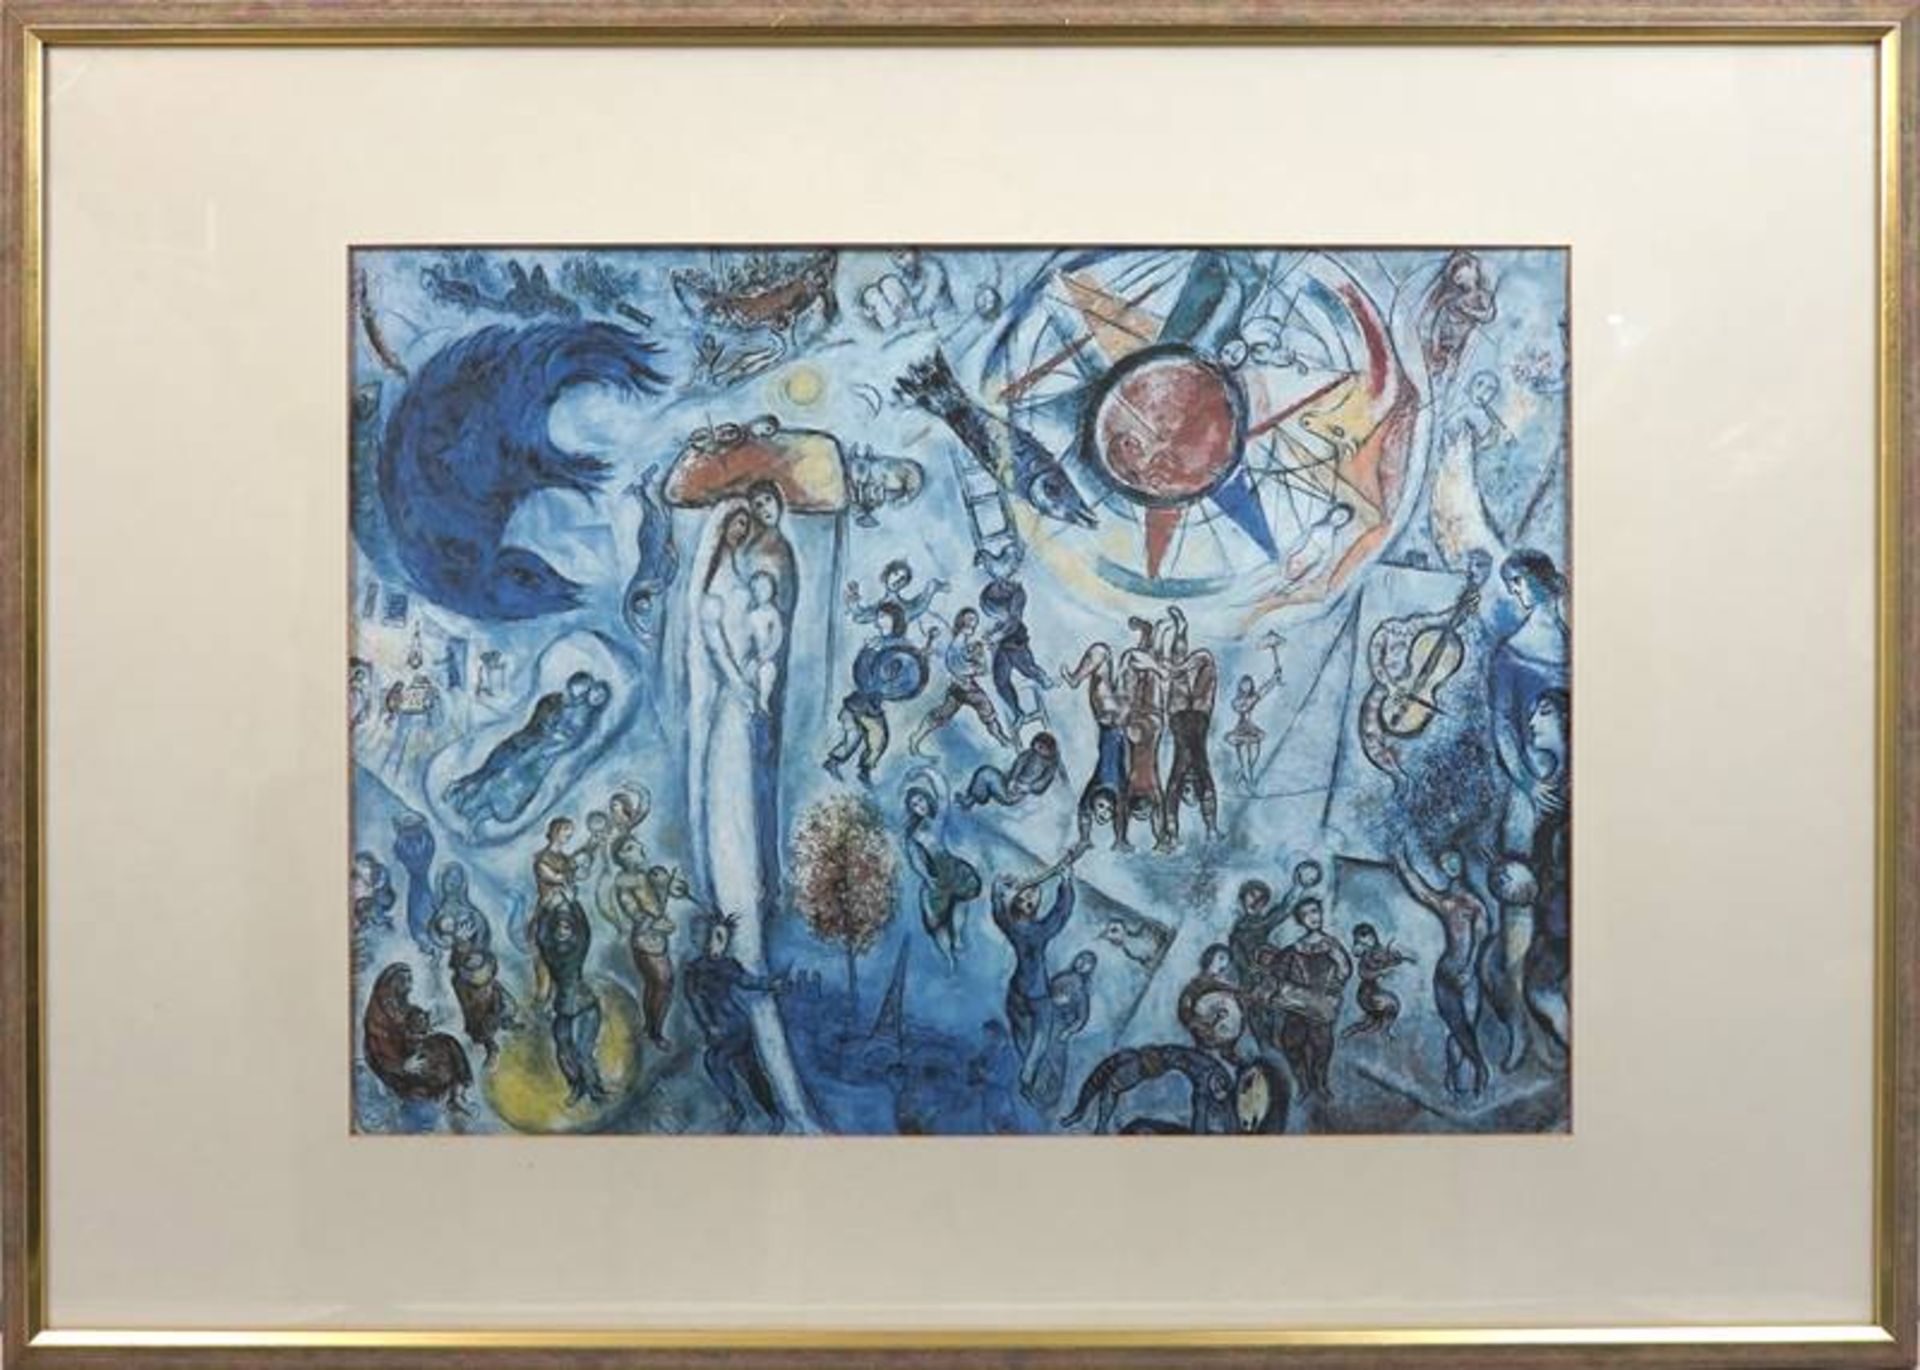 Chagall, Marc after - Image 2 of 4